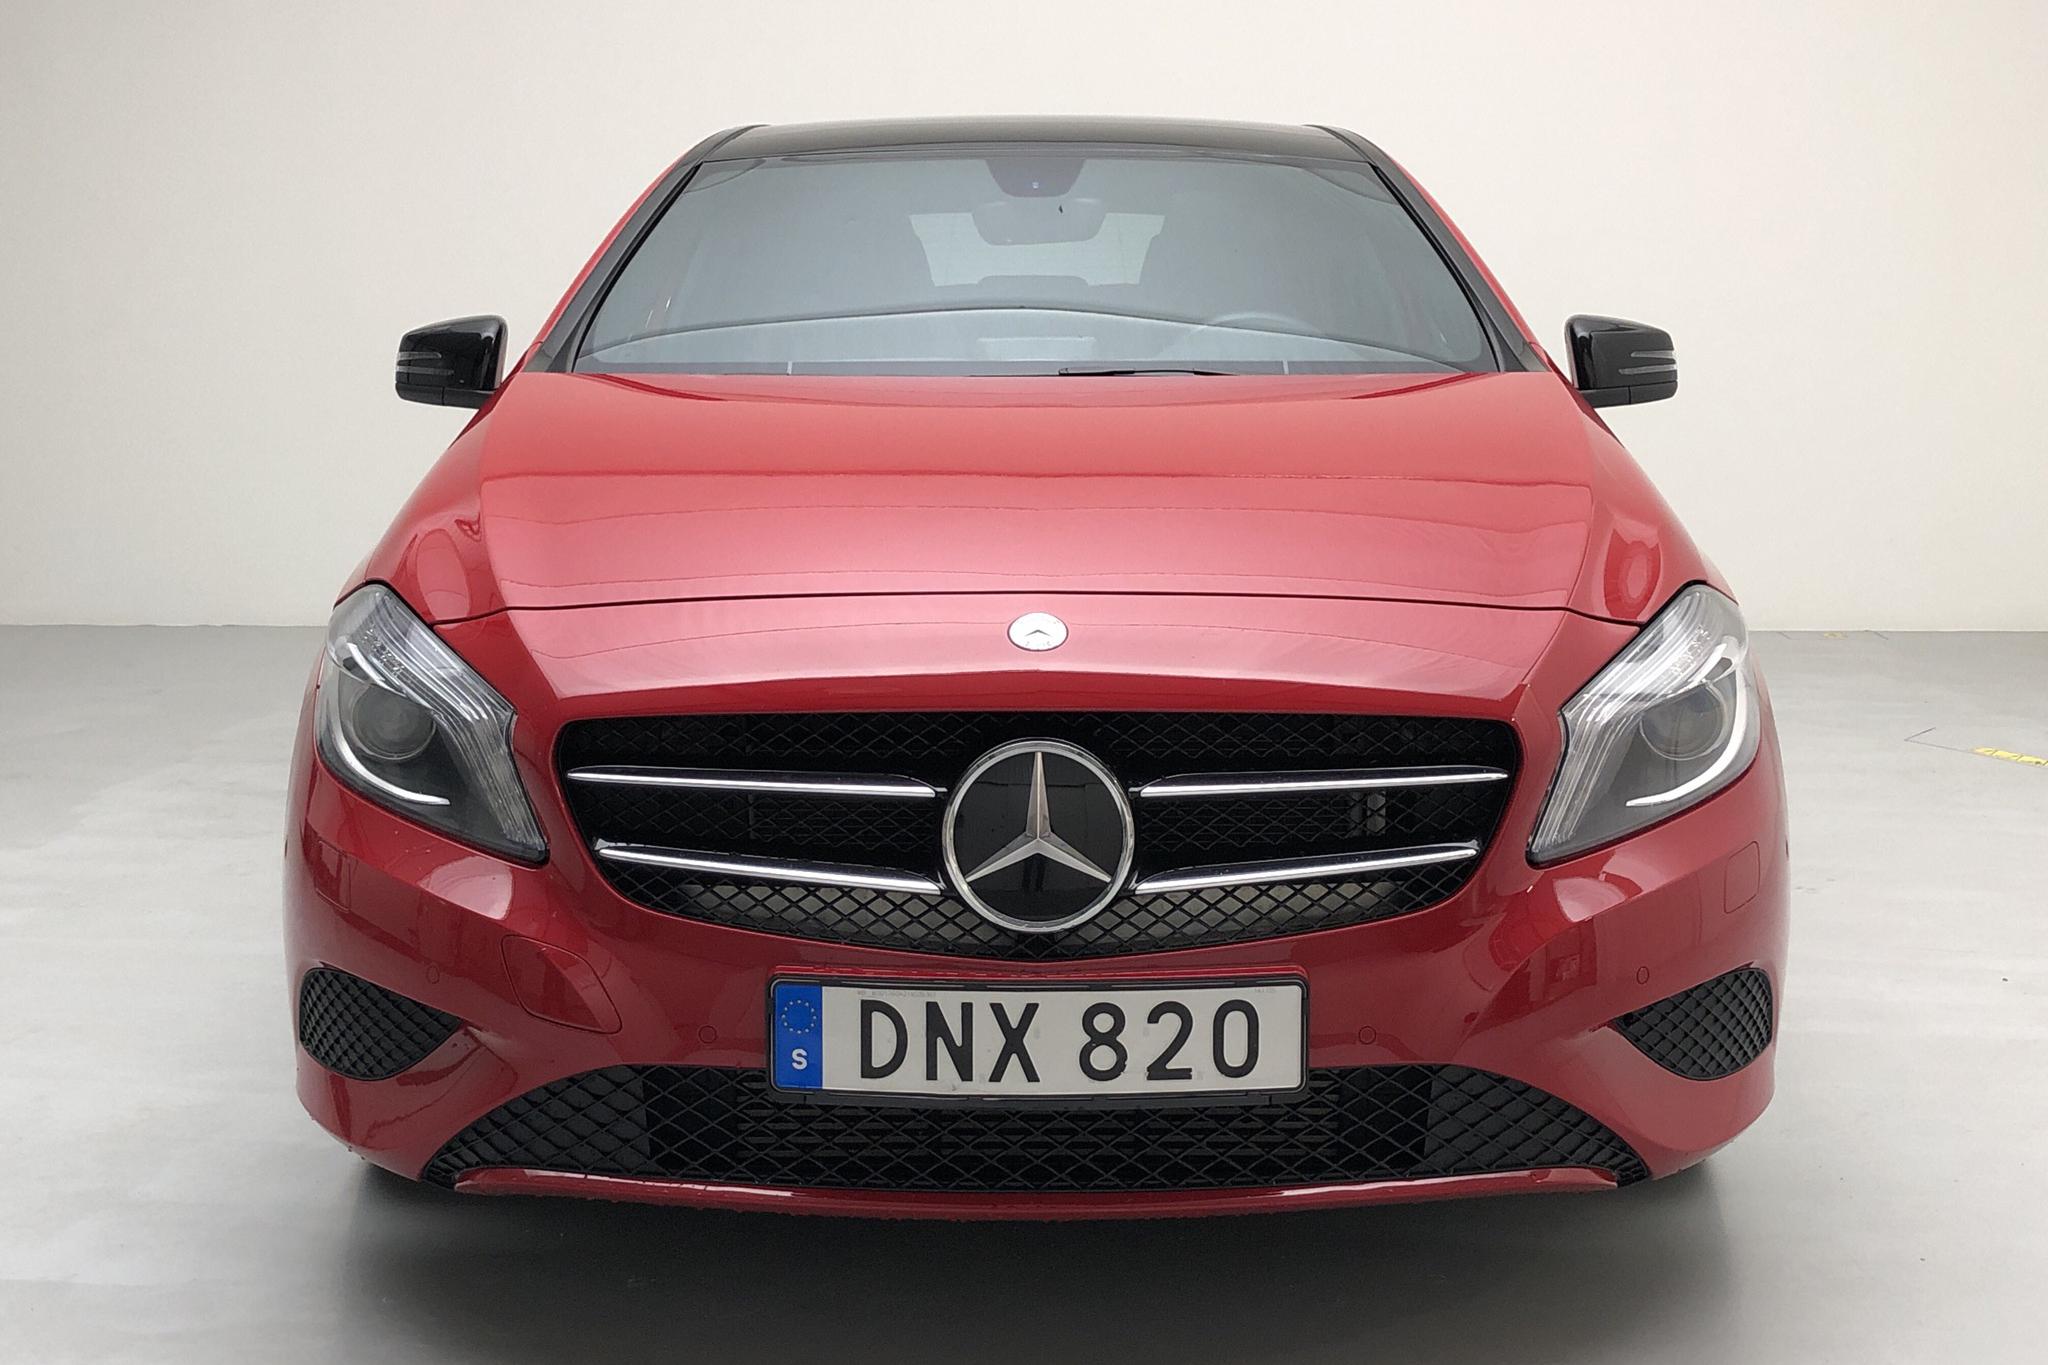 Mercedes A 180 5dr W176 (122hk) - 36 190 km - Automatic - red - 2015